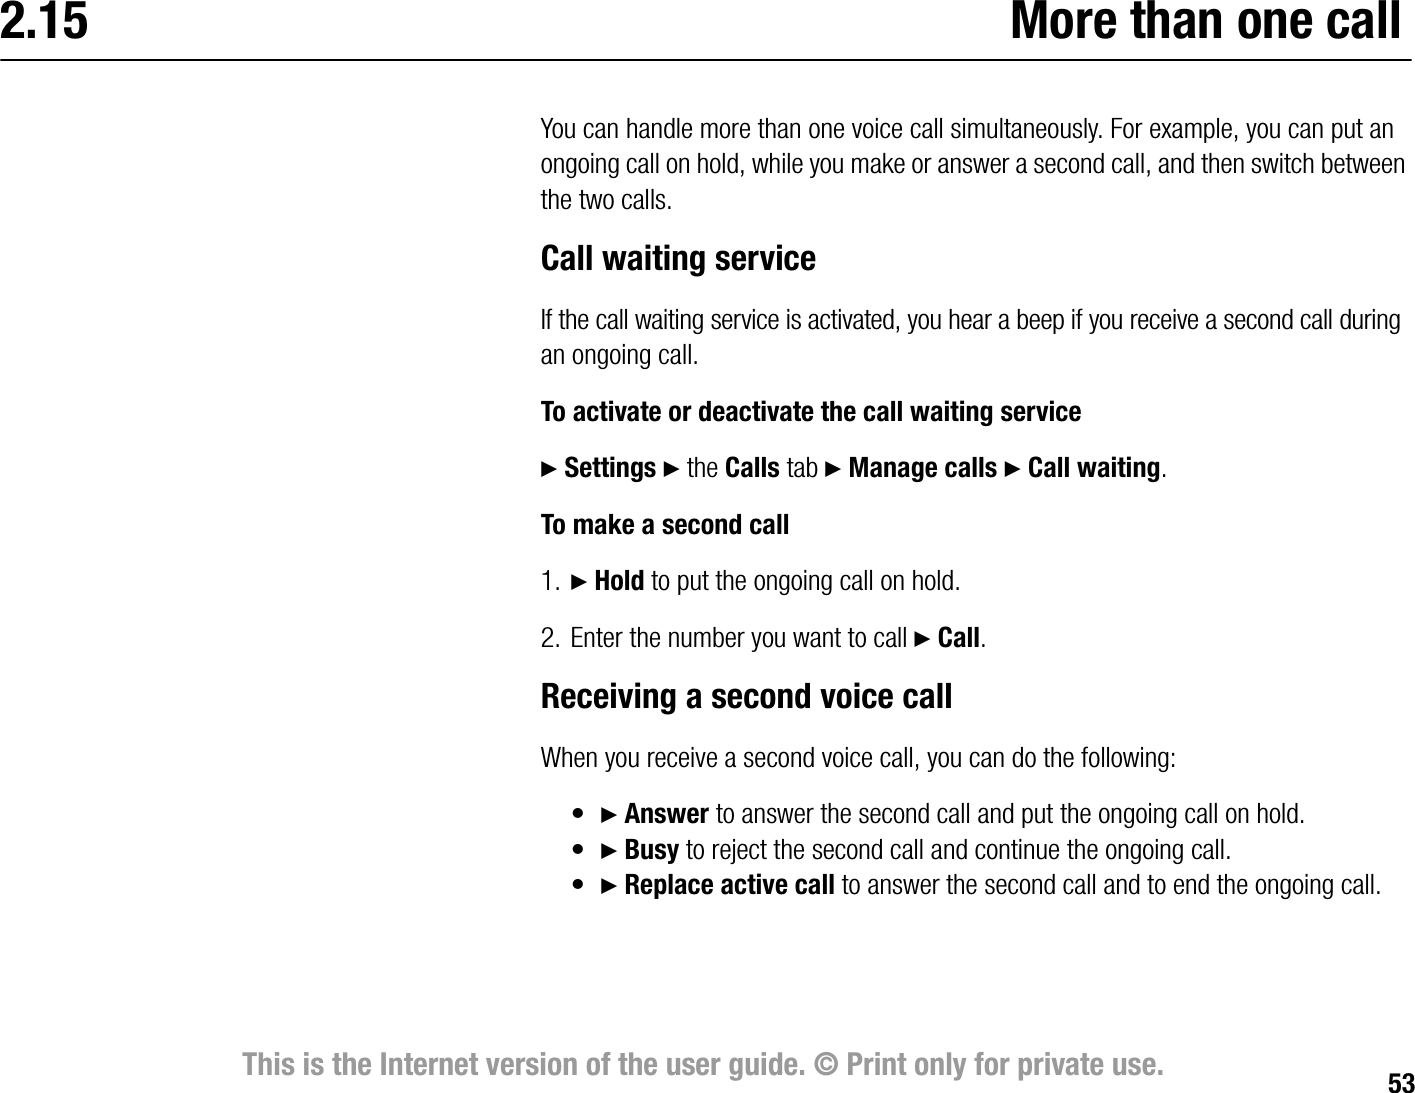 53This is the Internet version of the user guide. © Print only for private use.2.15 More than one callYou can handle more than one voice call simultaneously. For example, you can put an ongoing call on hold, while you make or answer a second call, and then switch between the two calls. Call waiting serviceIf the call waiting service is activated, you hear a beep if you receive a second call during an ongoing call.To activate or deactivate the call waiting service} Settings } the Calls tab } Manage calls } Call waiting.To make a second call1. } Hold to put the ongoing call on hold.2. Enter the number you want to call } Call.Receiving a second voice callWhen you receive a second voice call, you can do the following:•} Answer to answer the second call and put the ongoing call on hold.•} Busy to reject the second call and continue the ongoing call.•} Replace active call to answer the second call and to end the ongoing call. 